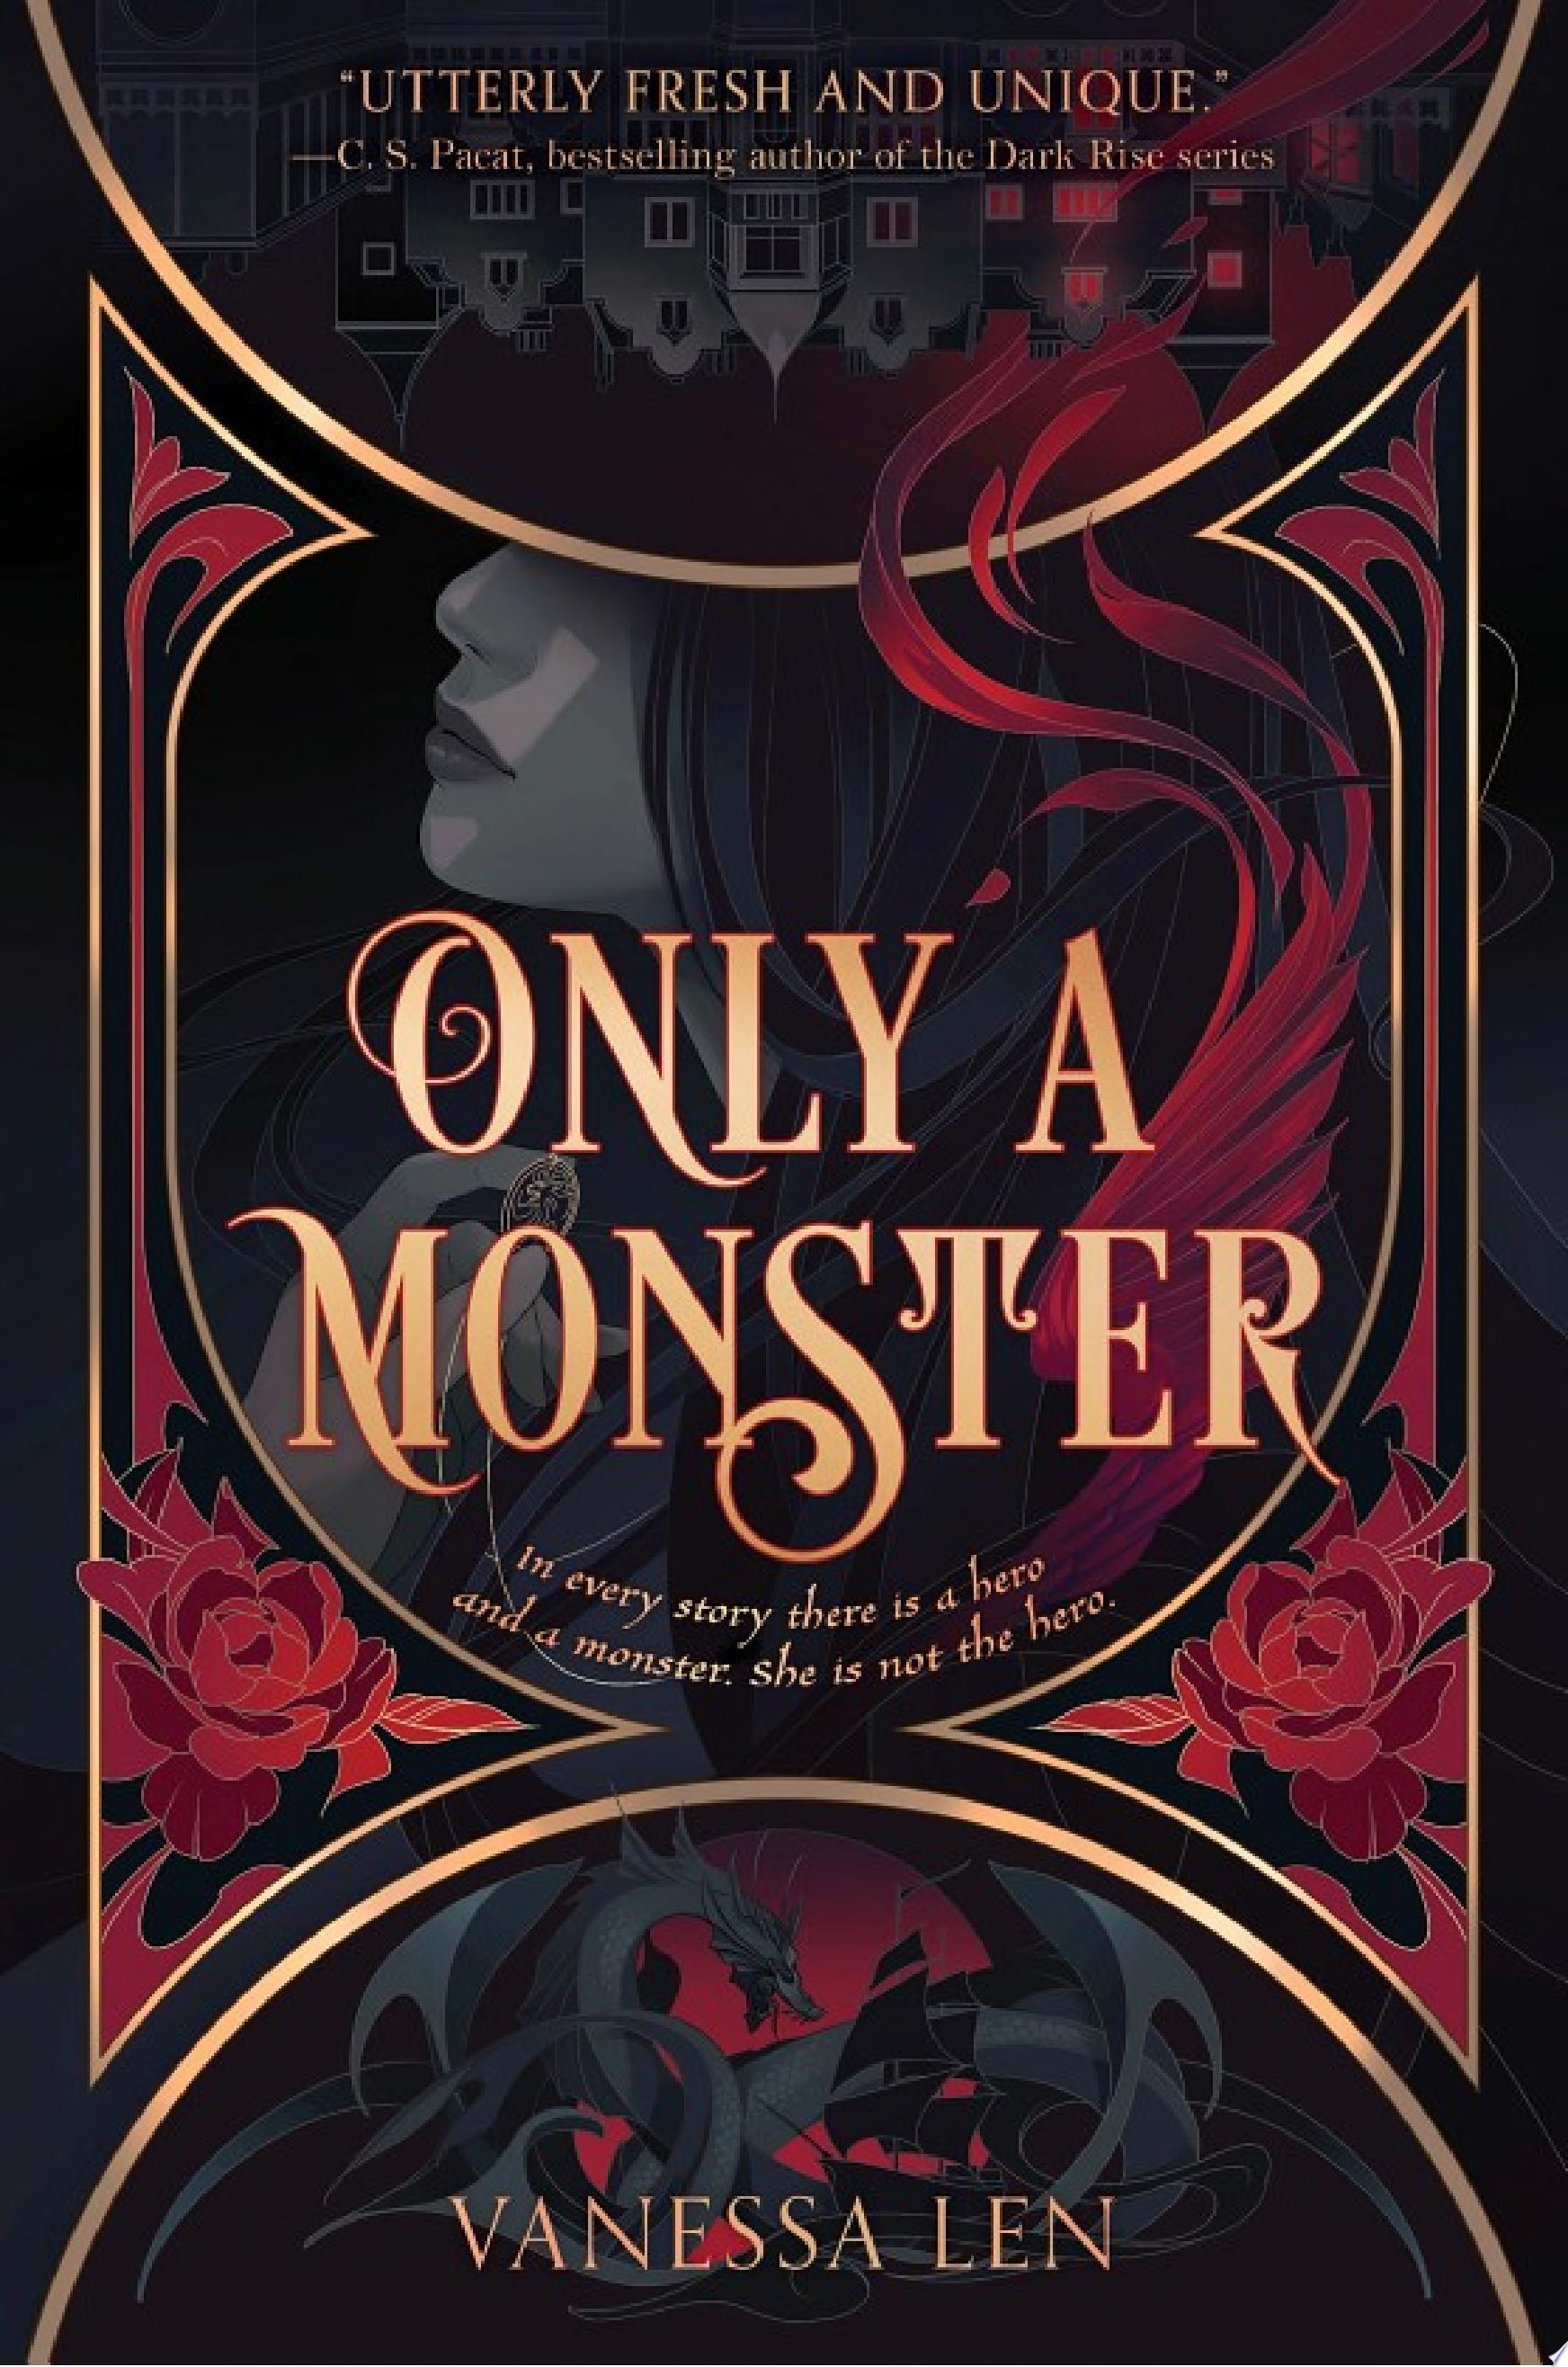 Image for "Only a Monster"